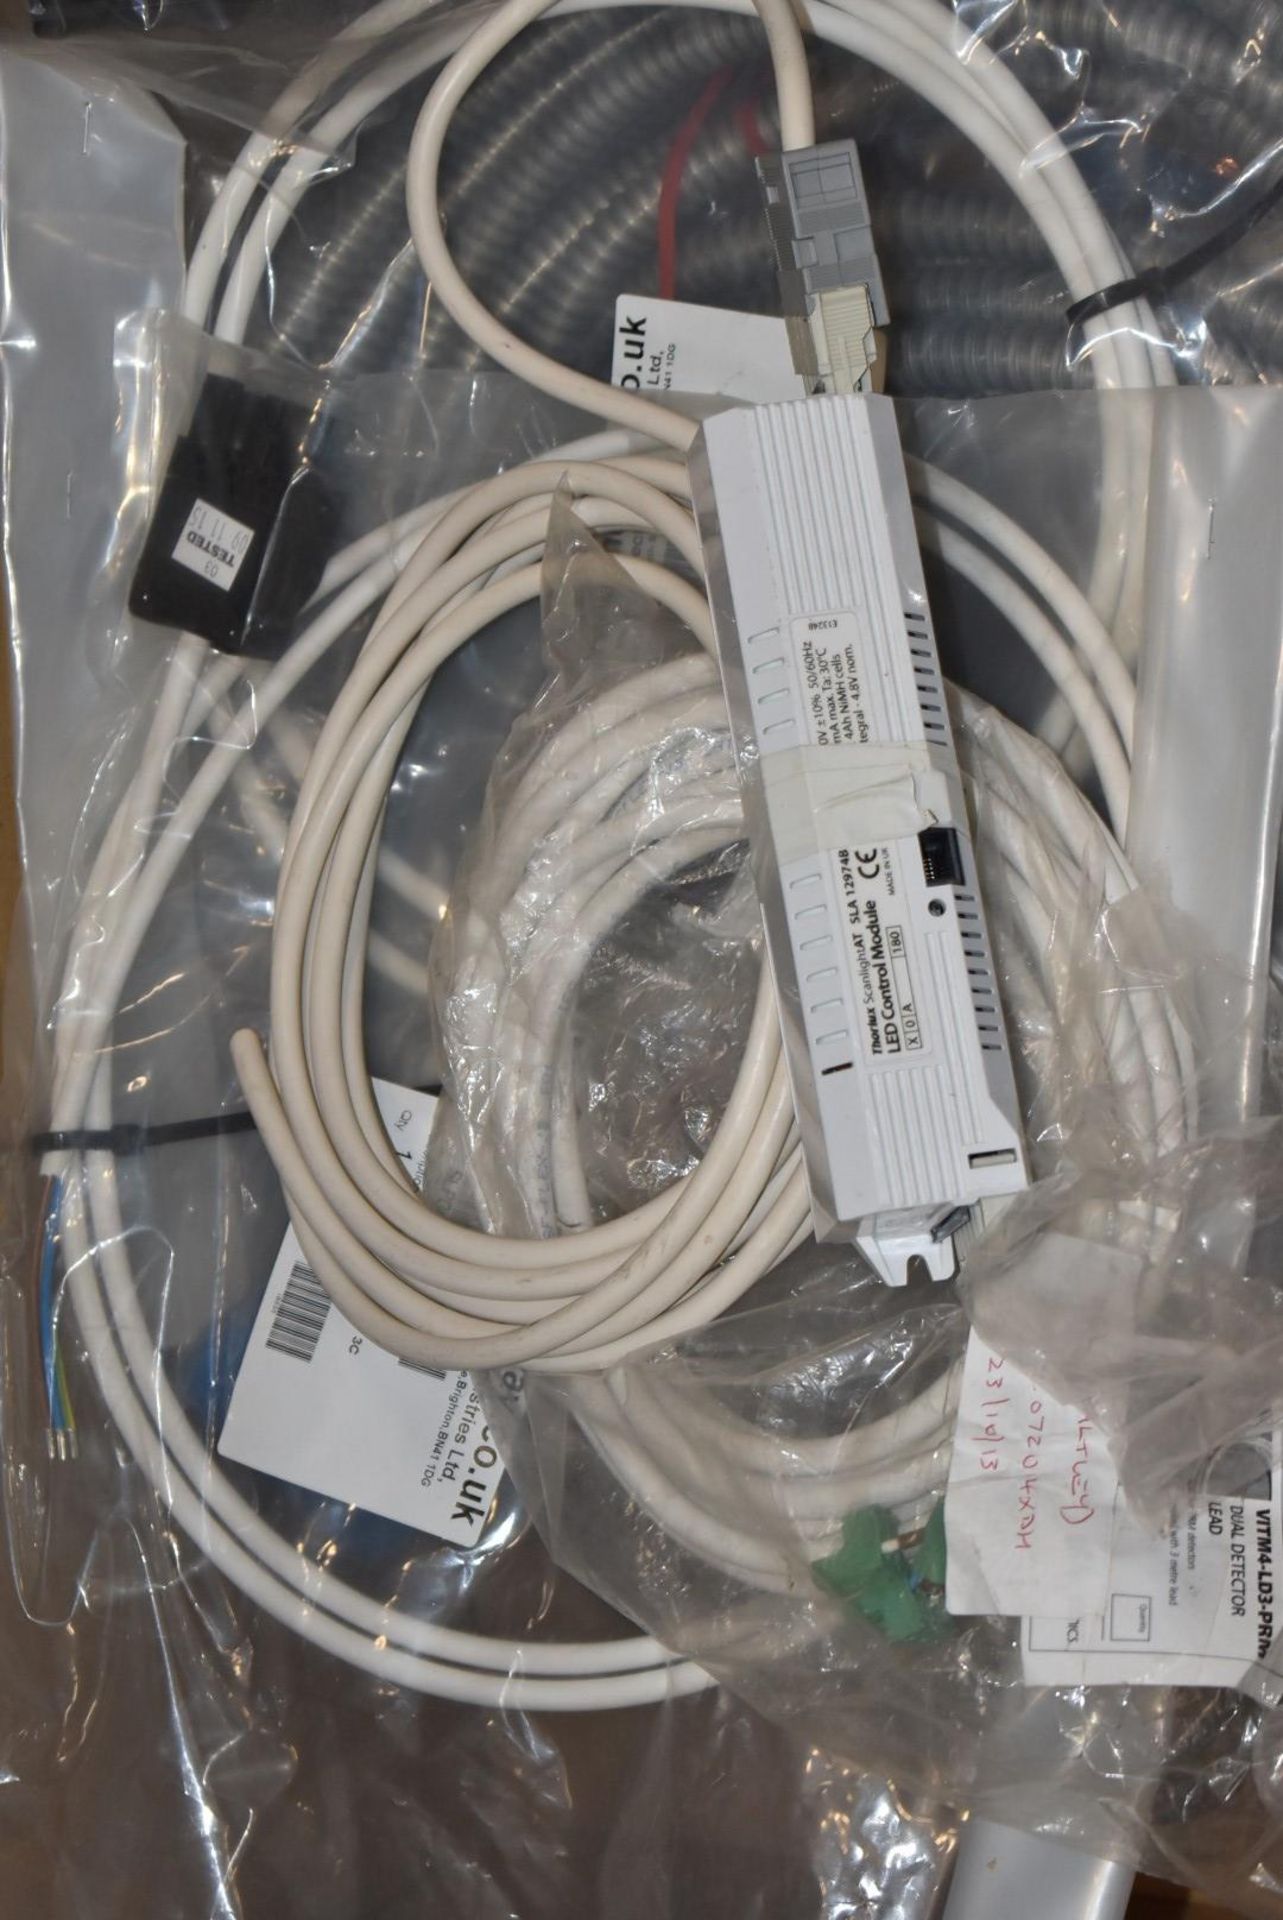 1 x Job Lot Of Assorted Electrical Components - Ref: C654 - CL816 - Location: Birmingham, B45 - Image 14 of 19